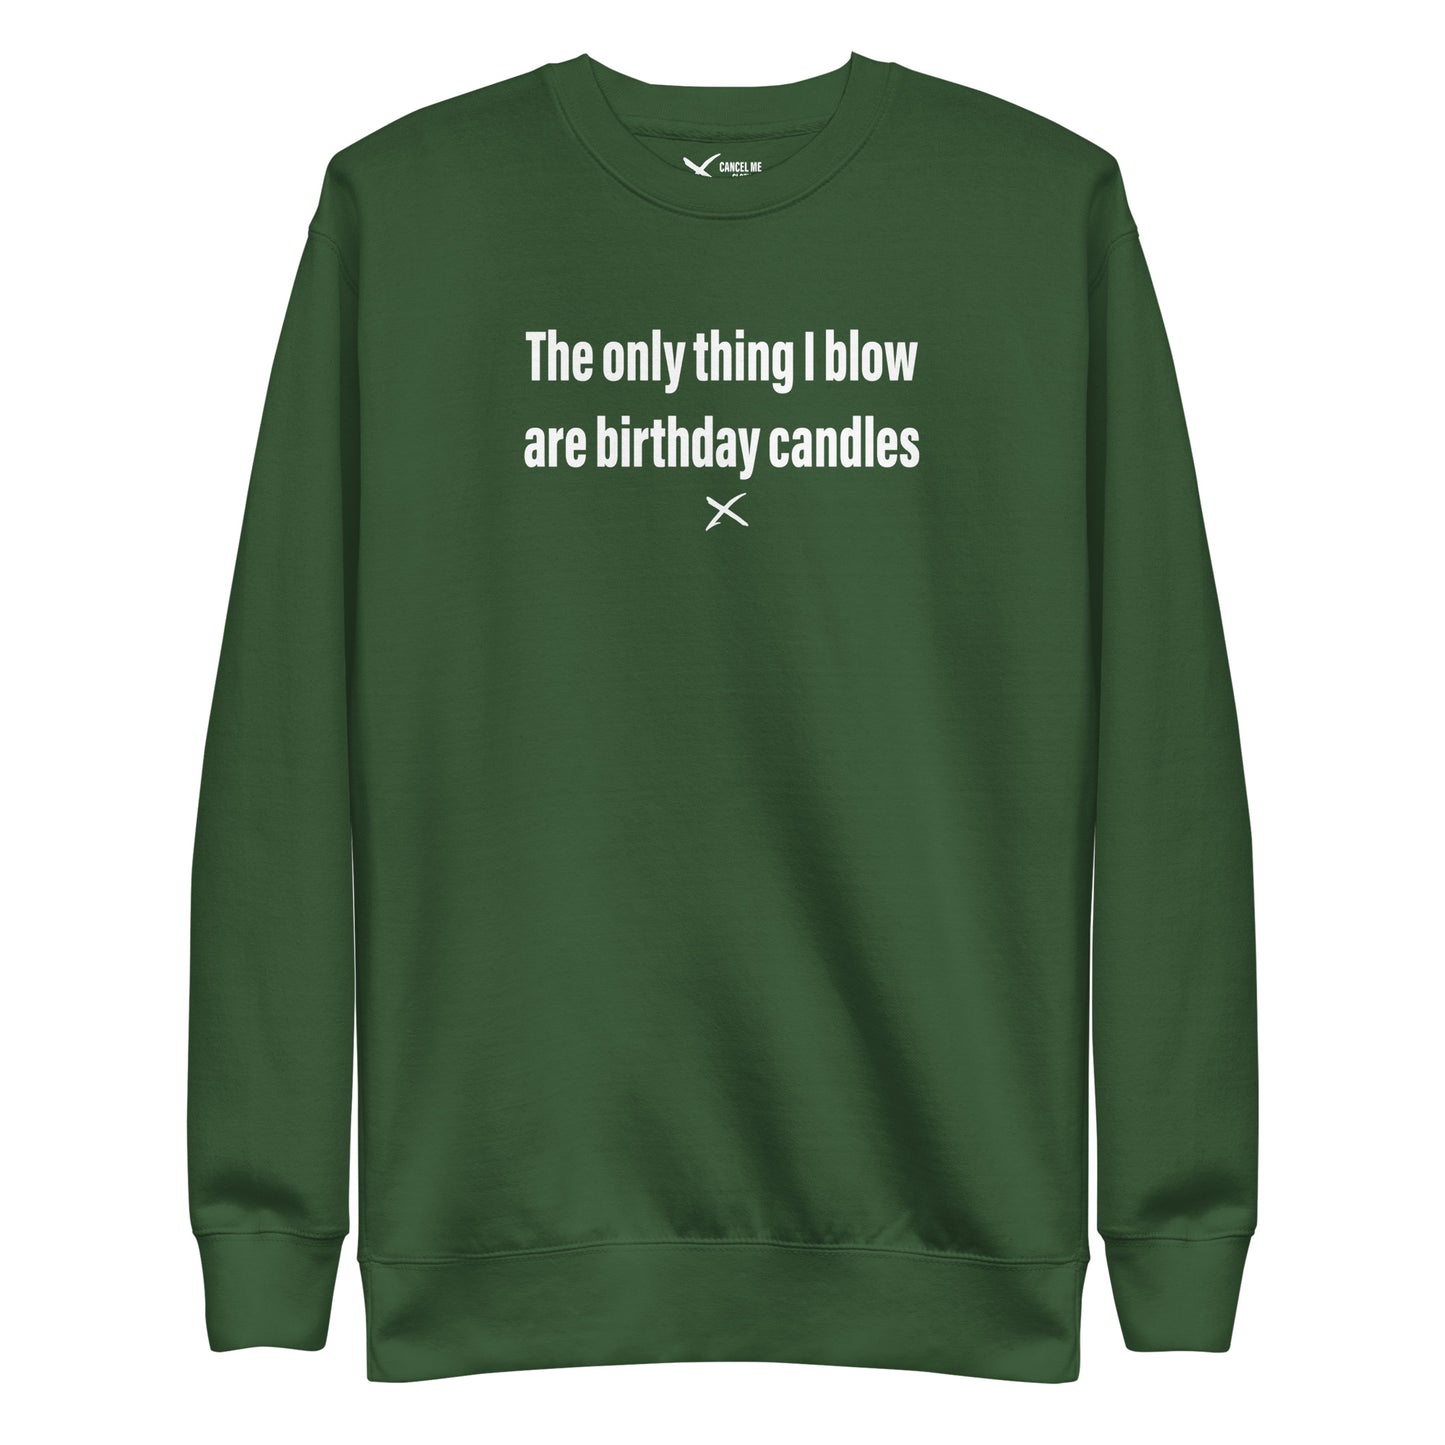 The only thing I blow are birthday candles - Sweatshirt